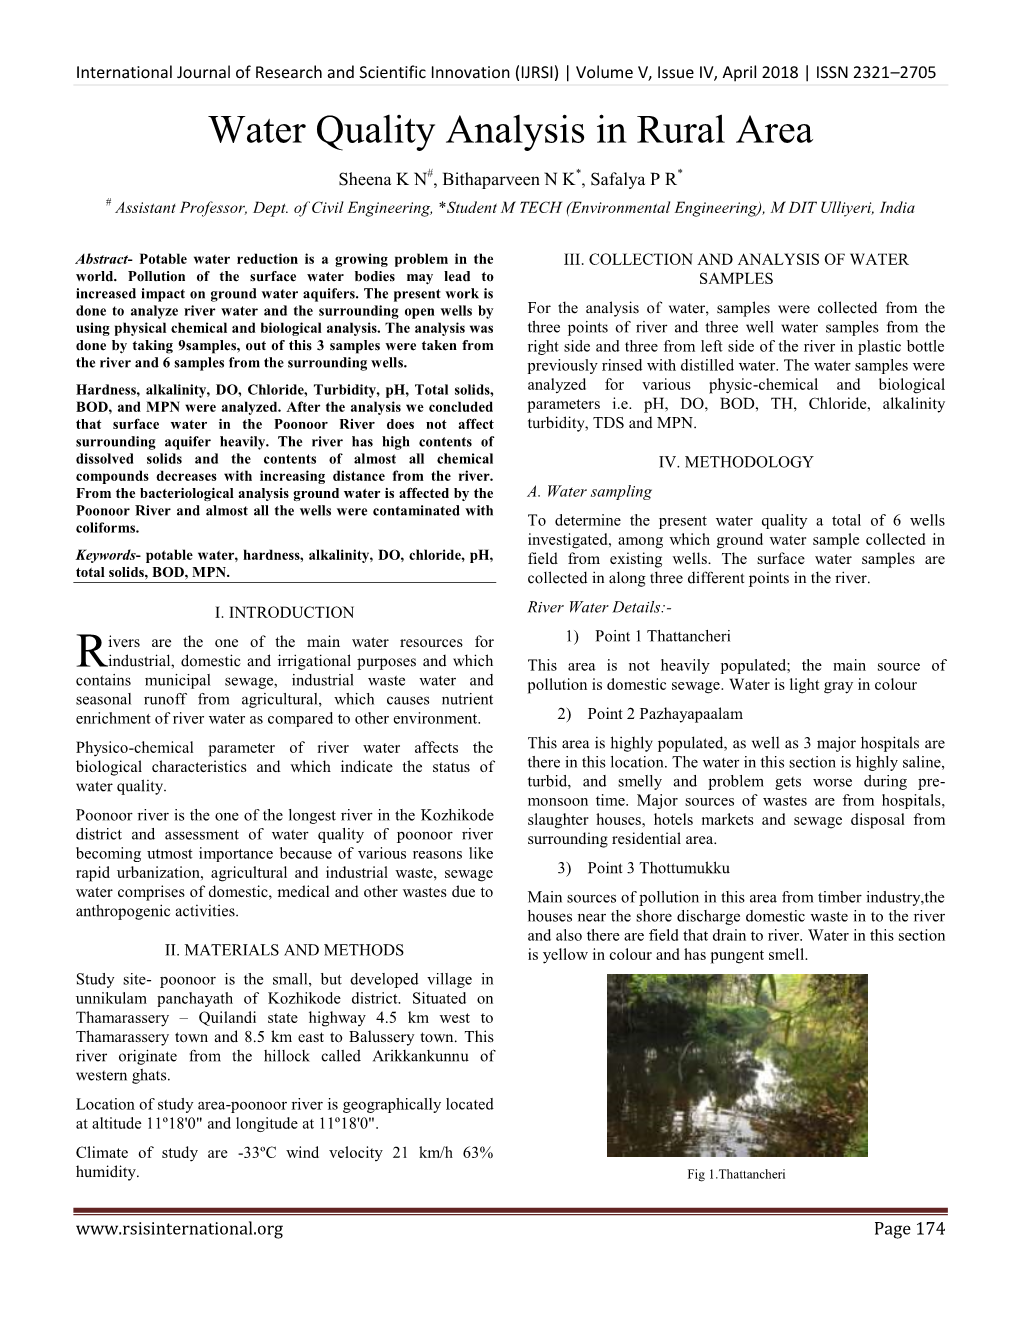 Water Quality Analysis in Rural Area